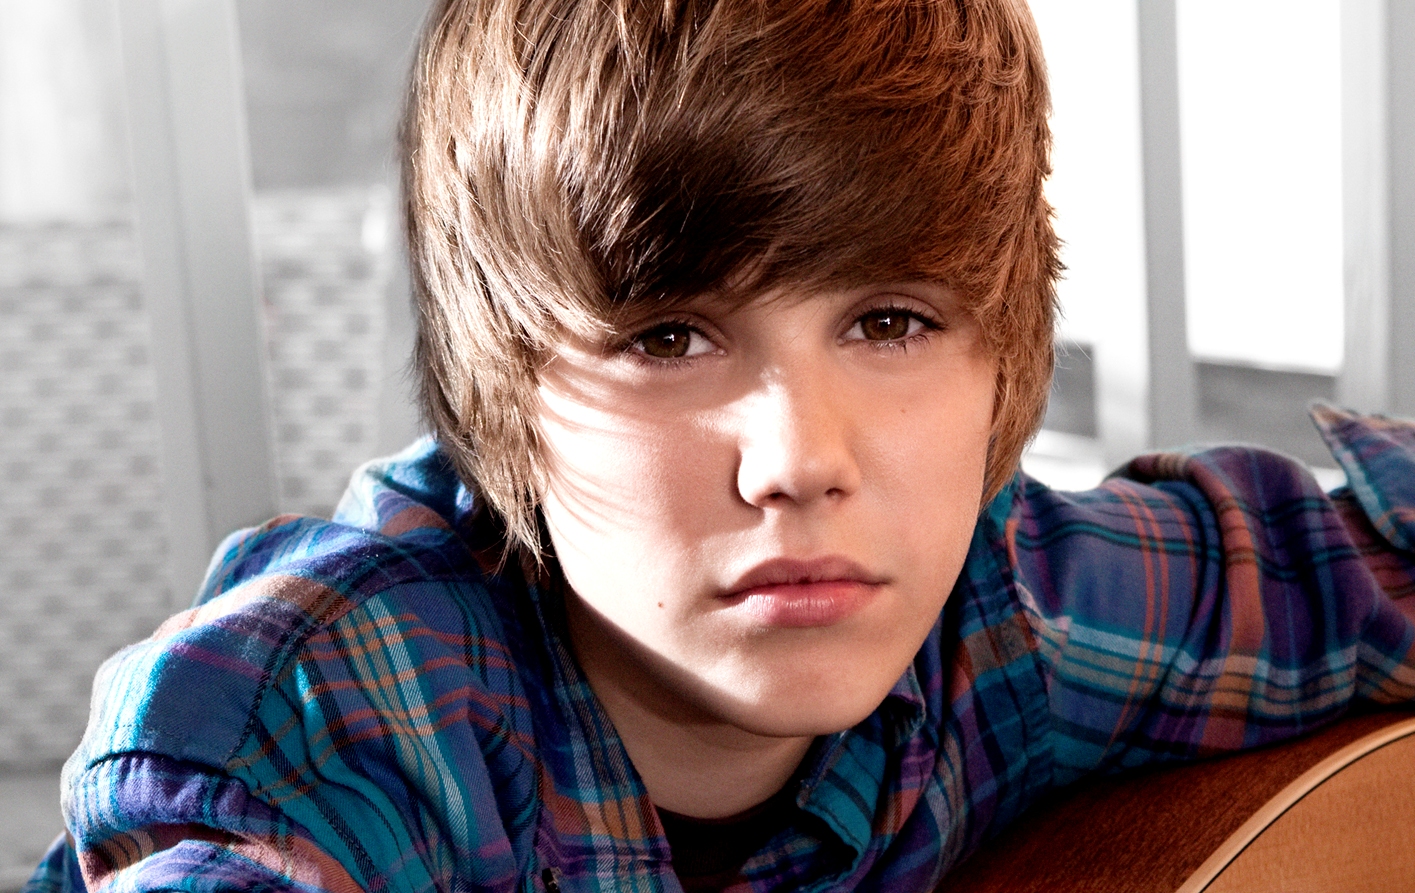 Justin Beiber Nominated In Three Worst Categories At The 2011 Shockwaves NME Awards